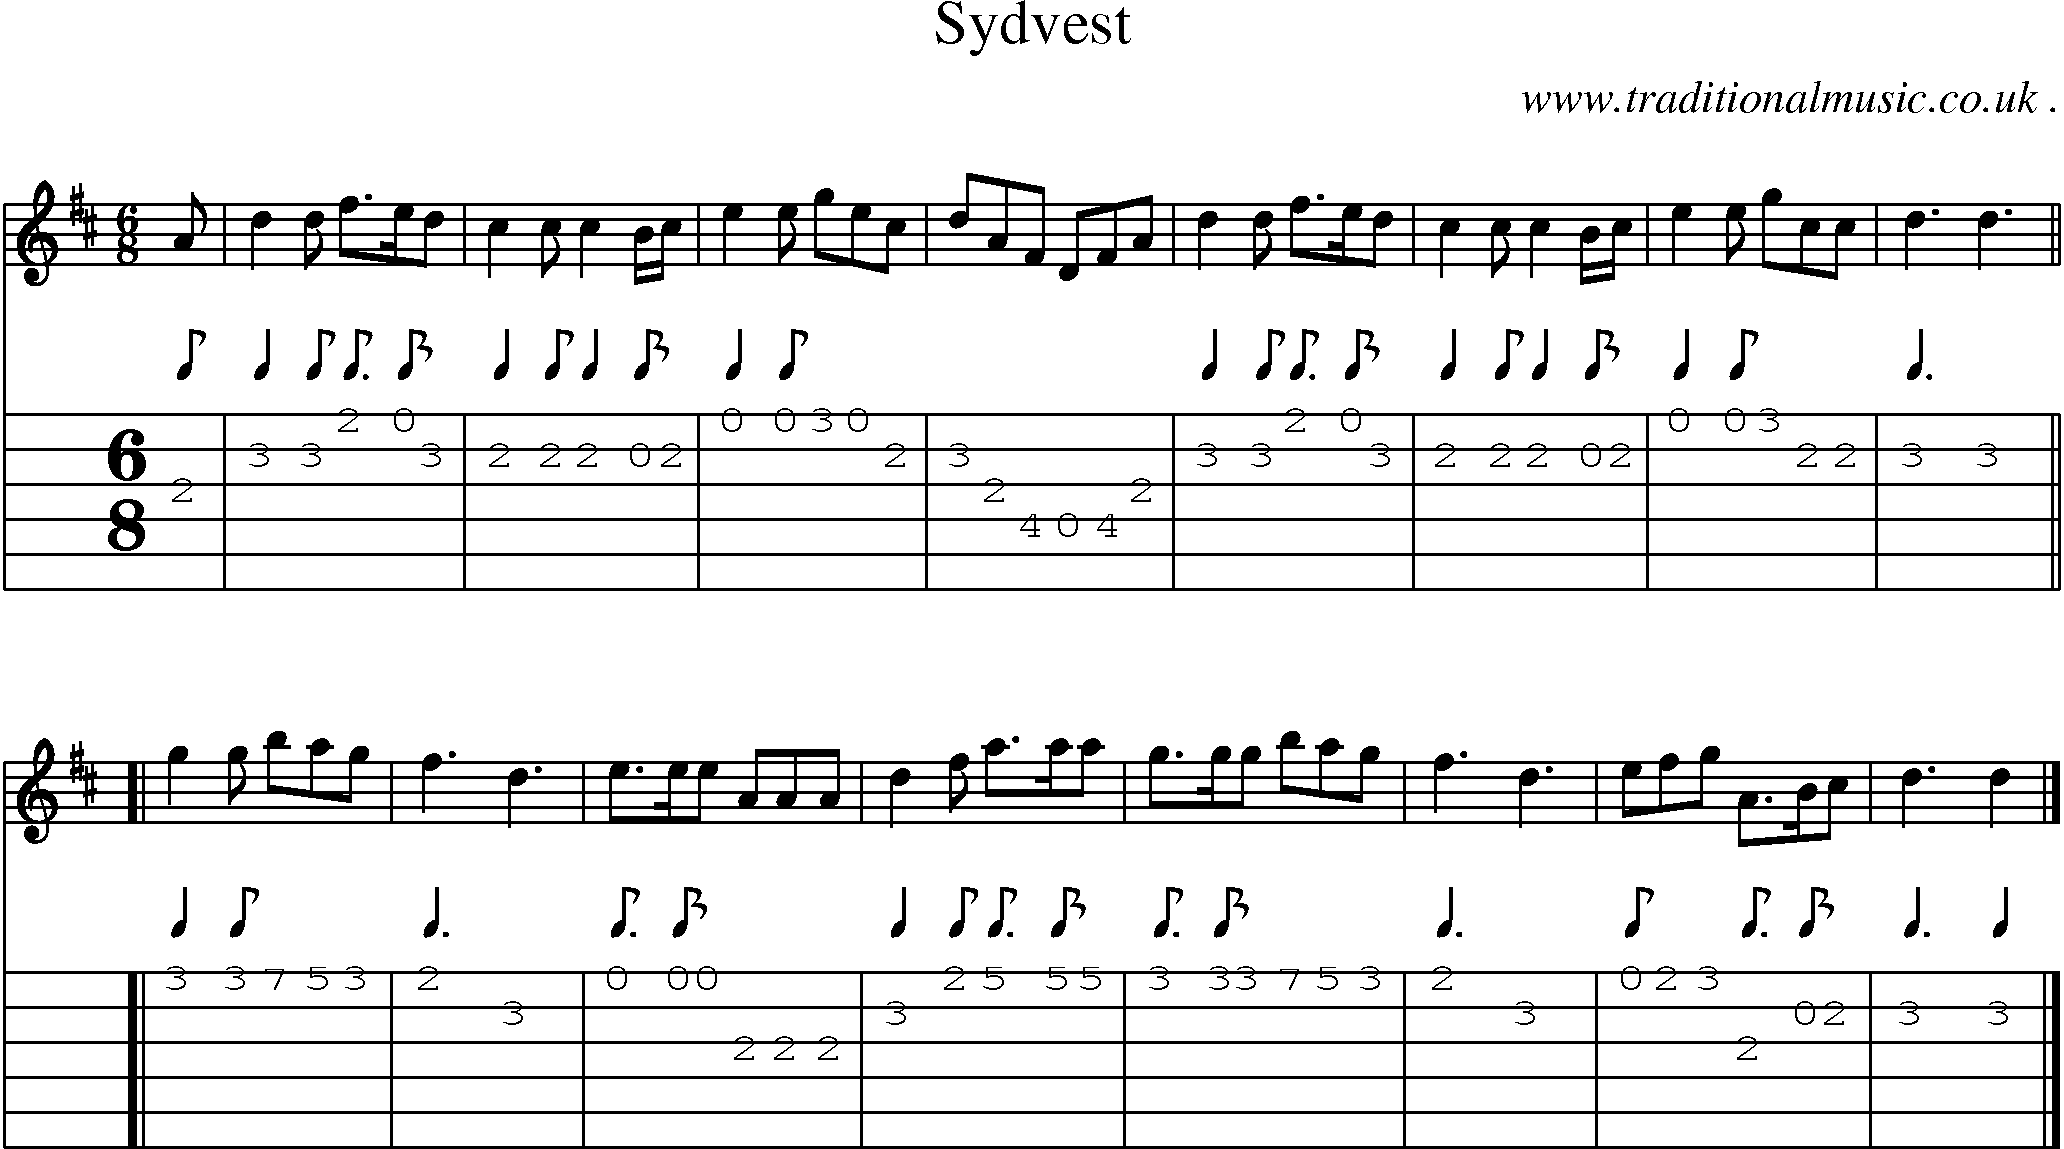 Sheet-music  score, Chords and Guitar Tabs for Sydvest